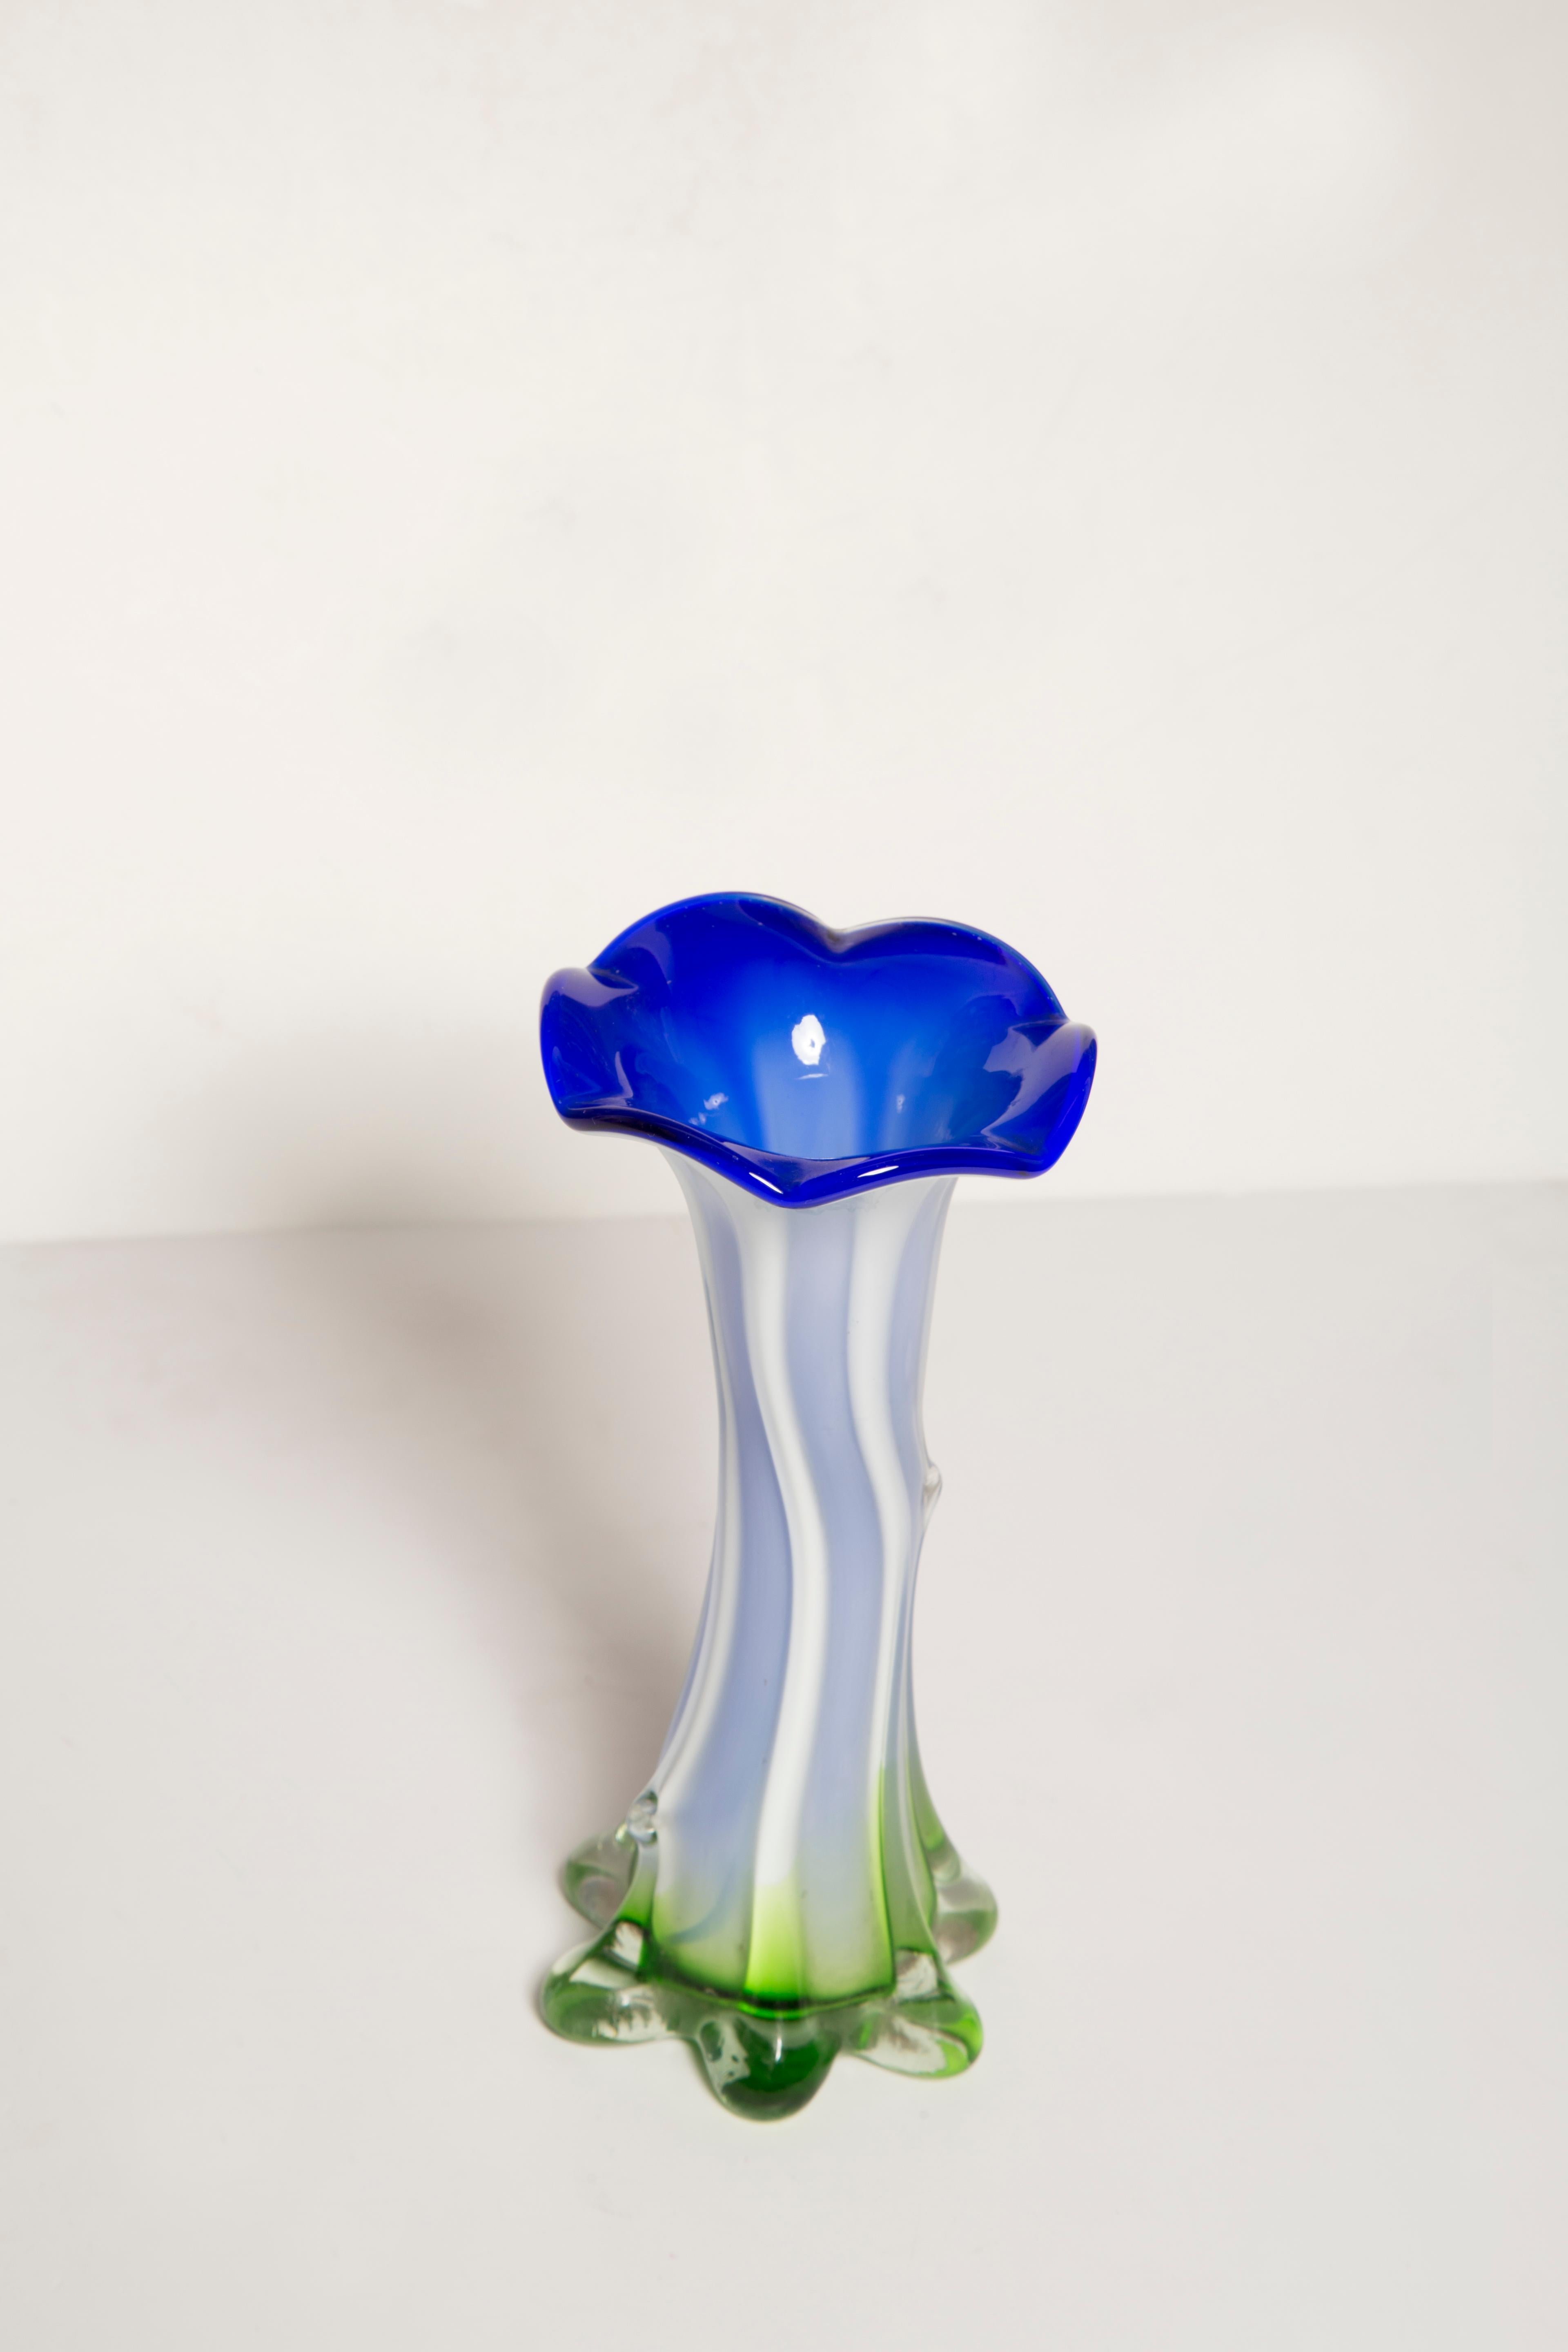 Mid Century Vintage Green and Blue Murano Vase, Italy, 1960s For Sale 1